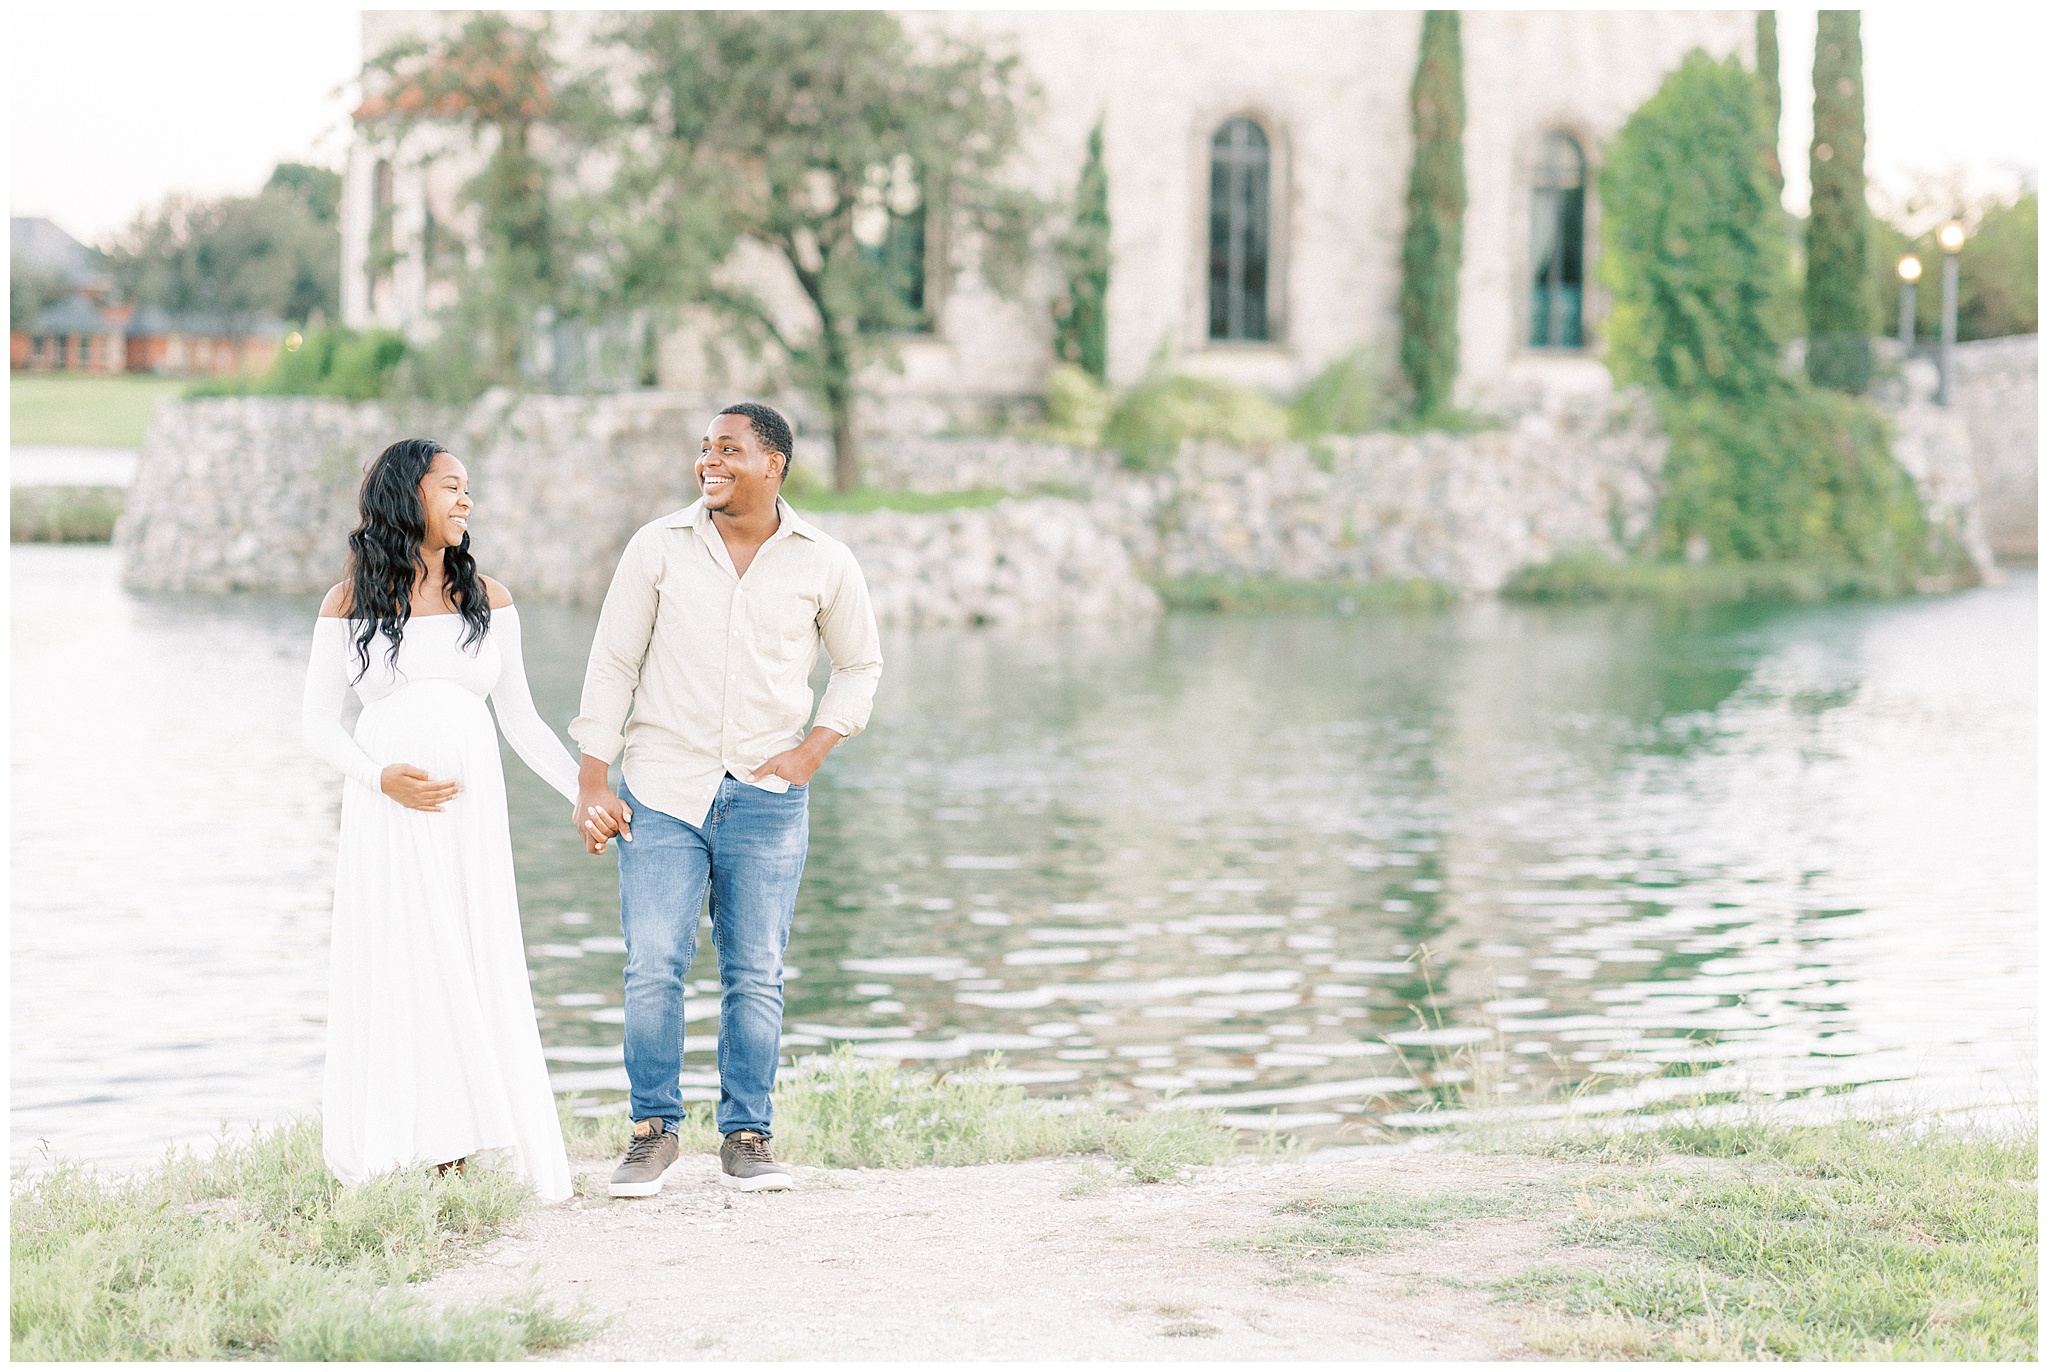 A mother to be walks along a lake with a stone castle in the background while holding hands with her partner wearing jeans and a tan button down Dallas Midwives